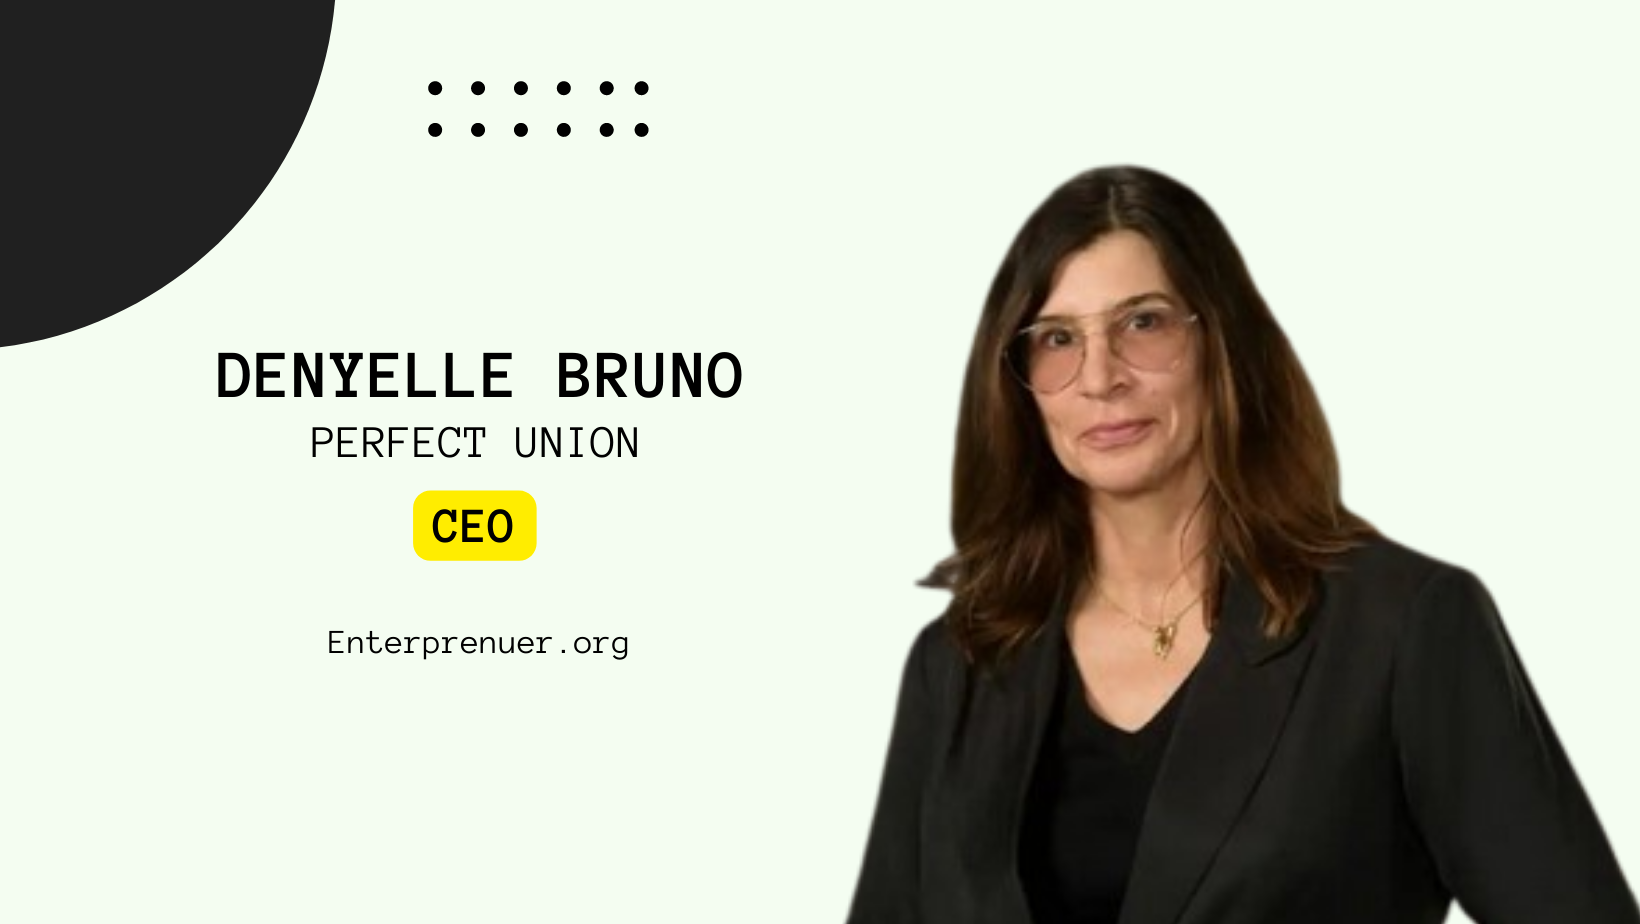 Meet Denyelle Bruno CEO of Perfect Union